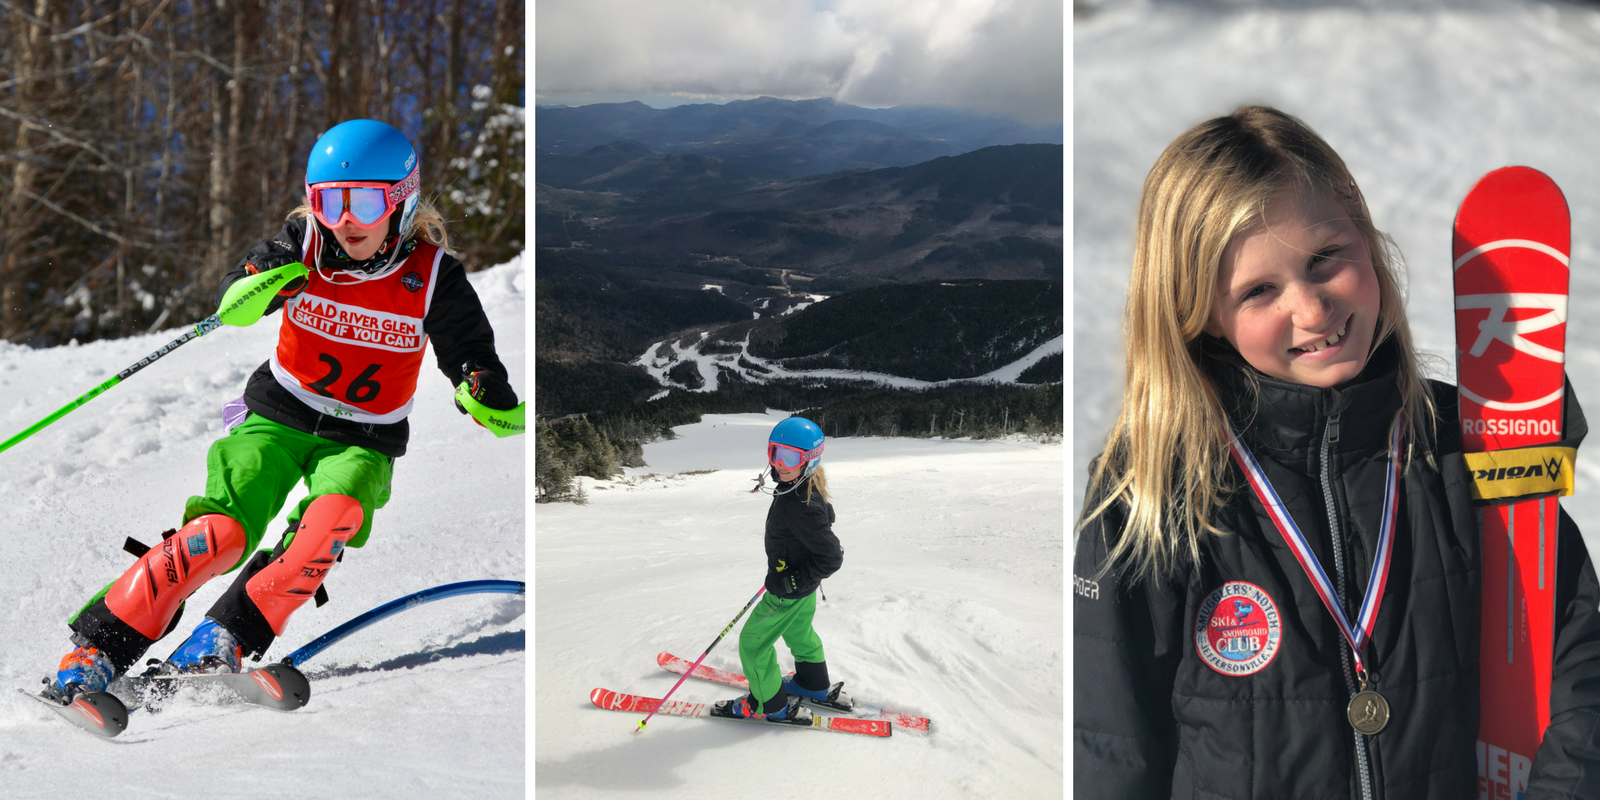 Vermont ski racer Chloe Avery of Smugglers Notch Ski and Snowboard Club lives by the mantra Always Be Faster Than the Boys (A.B.F.T.T.B.)